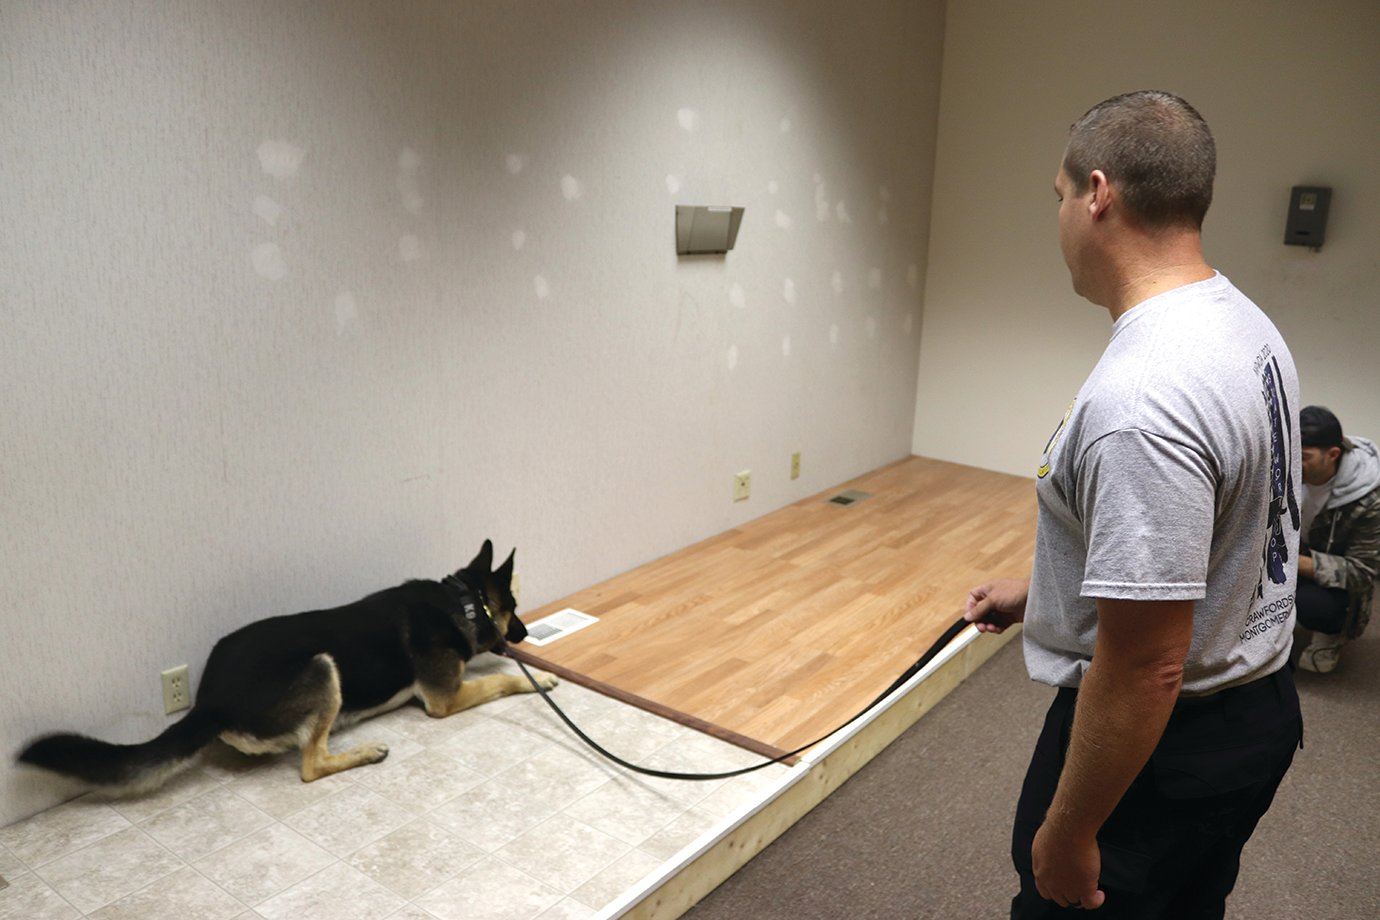 Sheriff's Deputy and Patrolman Michael Plant and his six-year-old K9 Partner Barrett check a room for hidden drugs Tuesday. Barrett has found the illegal items in the floor vent in a building owned by the city on Elmore Street. The building served as a K9 training facility this week for the North American Police Work Dog Association, which hosted its annual certification event in Crawfordsville this year.